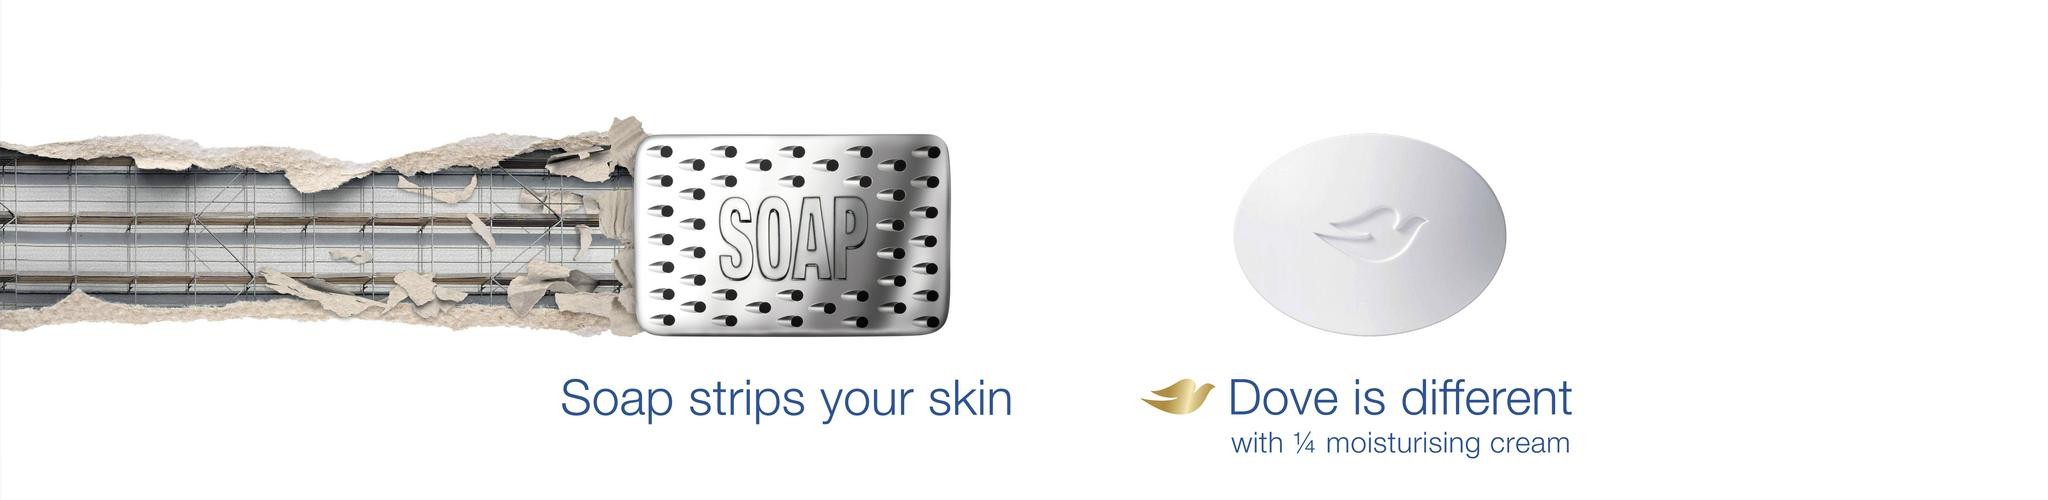 SOAP STRIPS YOUR SKIN